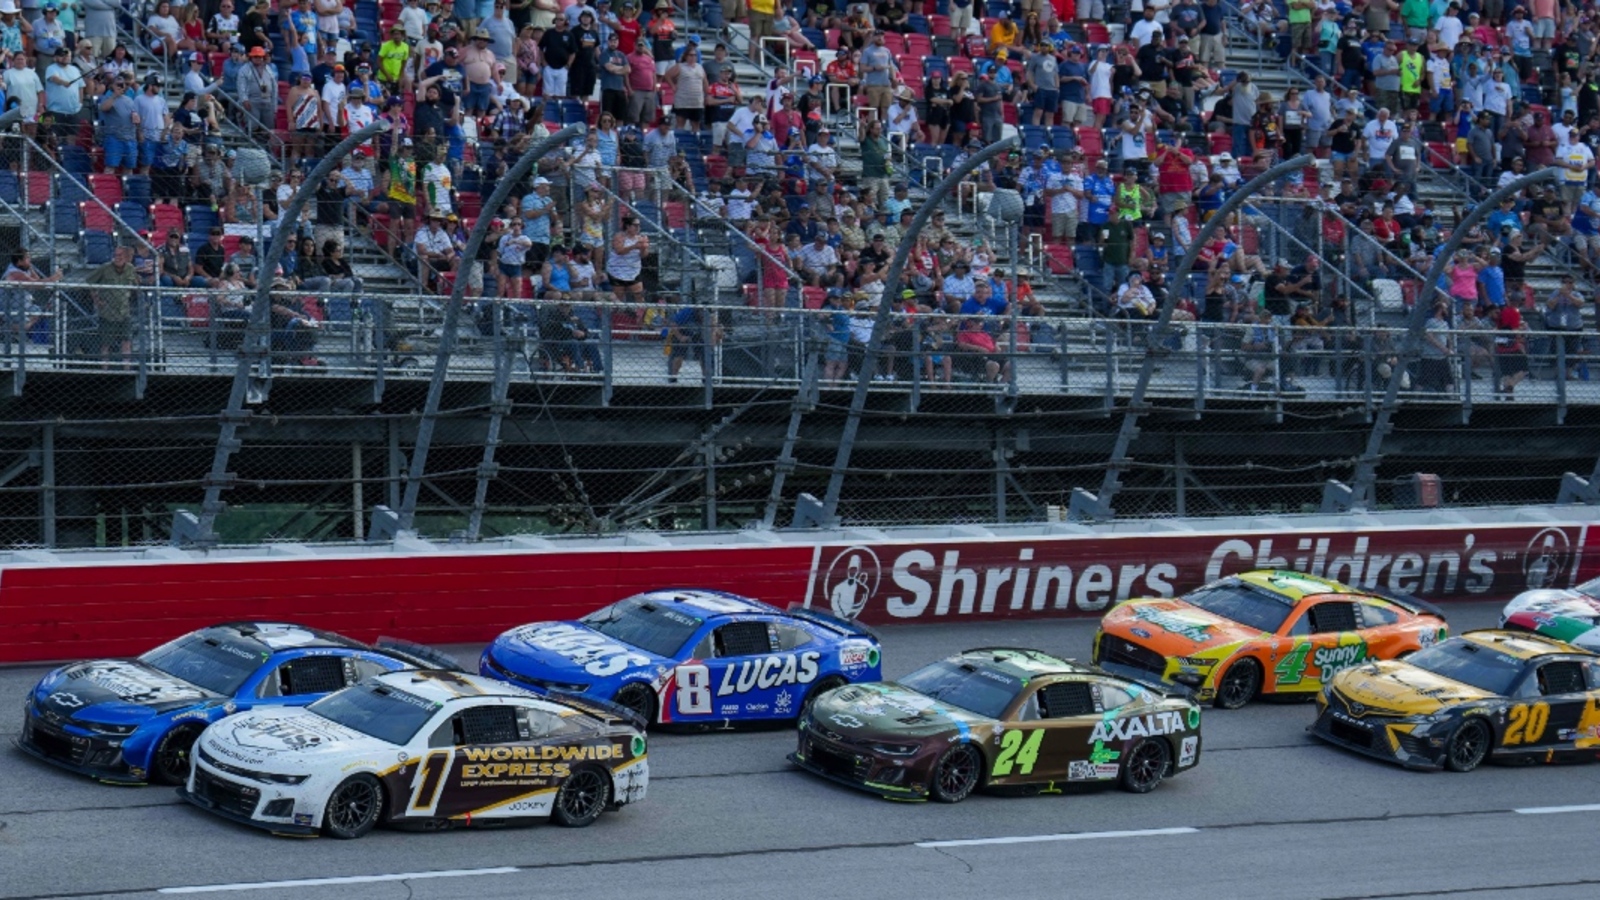 NASCAR Goodyear 400: Betting lines for the entire field to win at Darlington